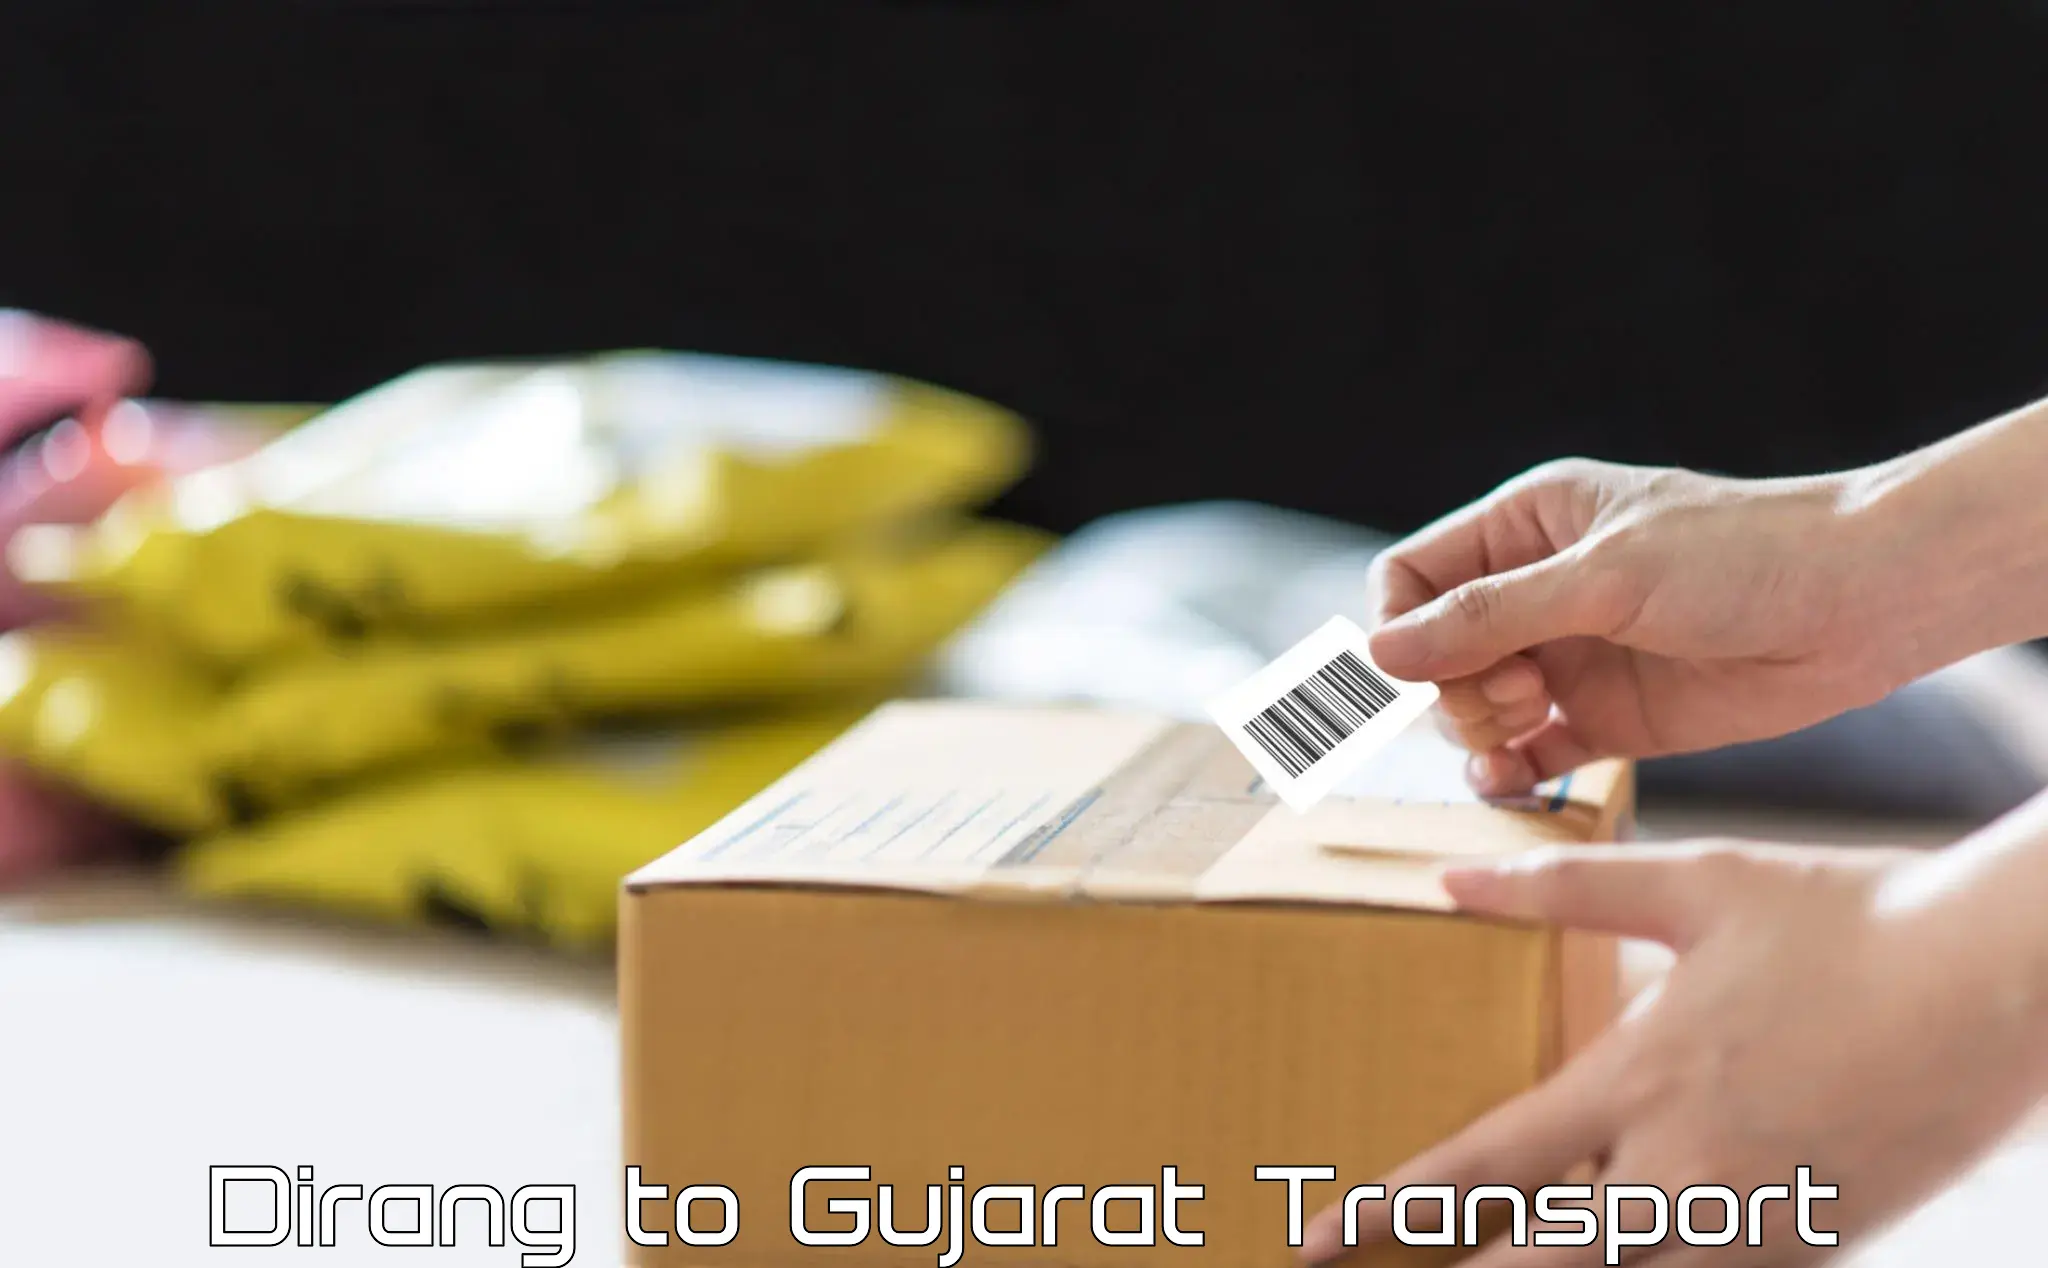 Cargo train transport services in Dirang to Gujarat